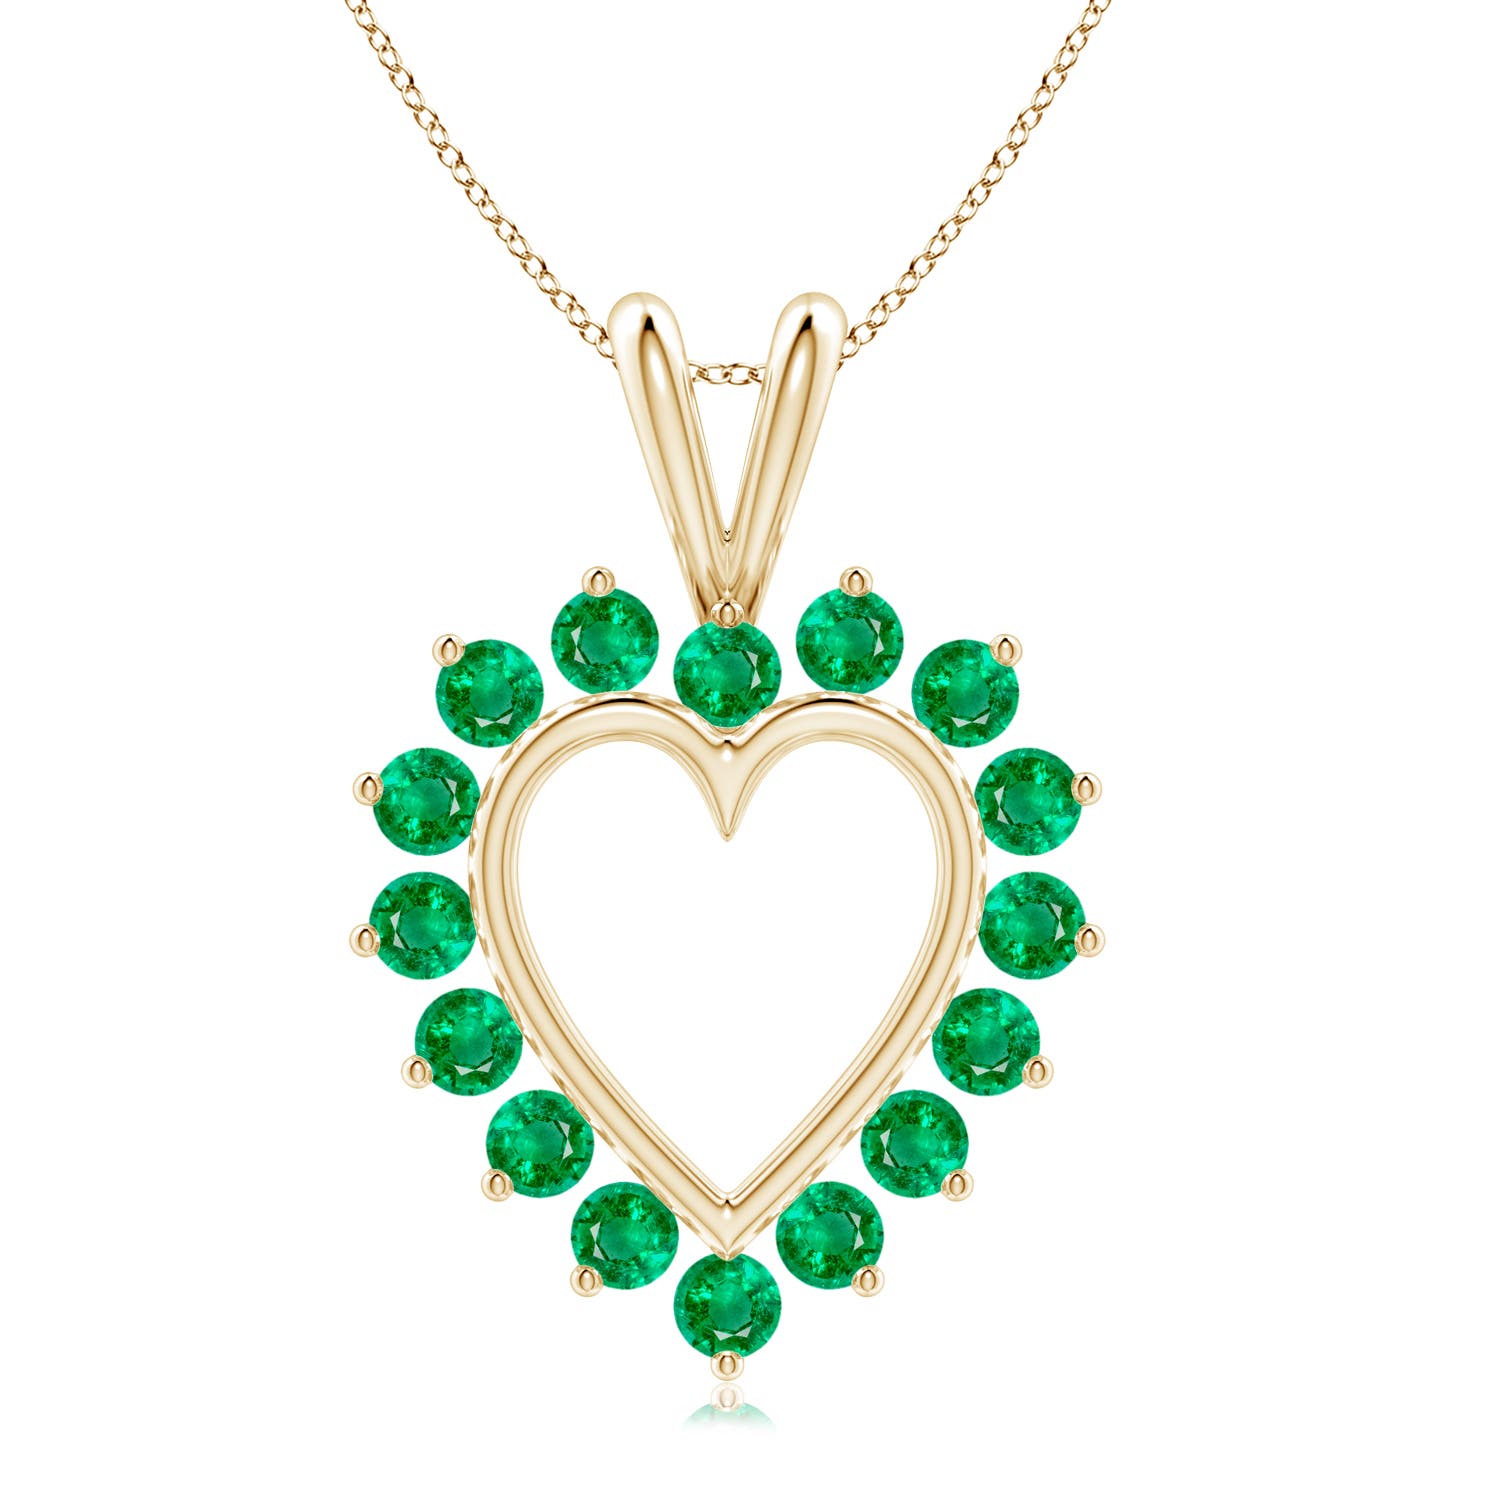 AAA - Emerald / 0.72 CT / 14 KT Yellow Gold